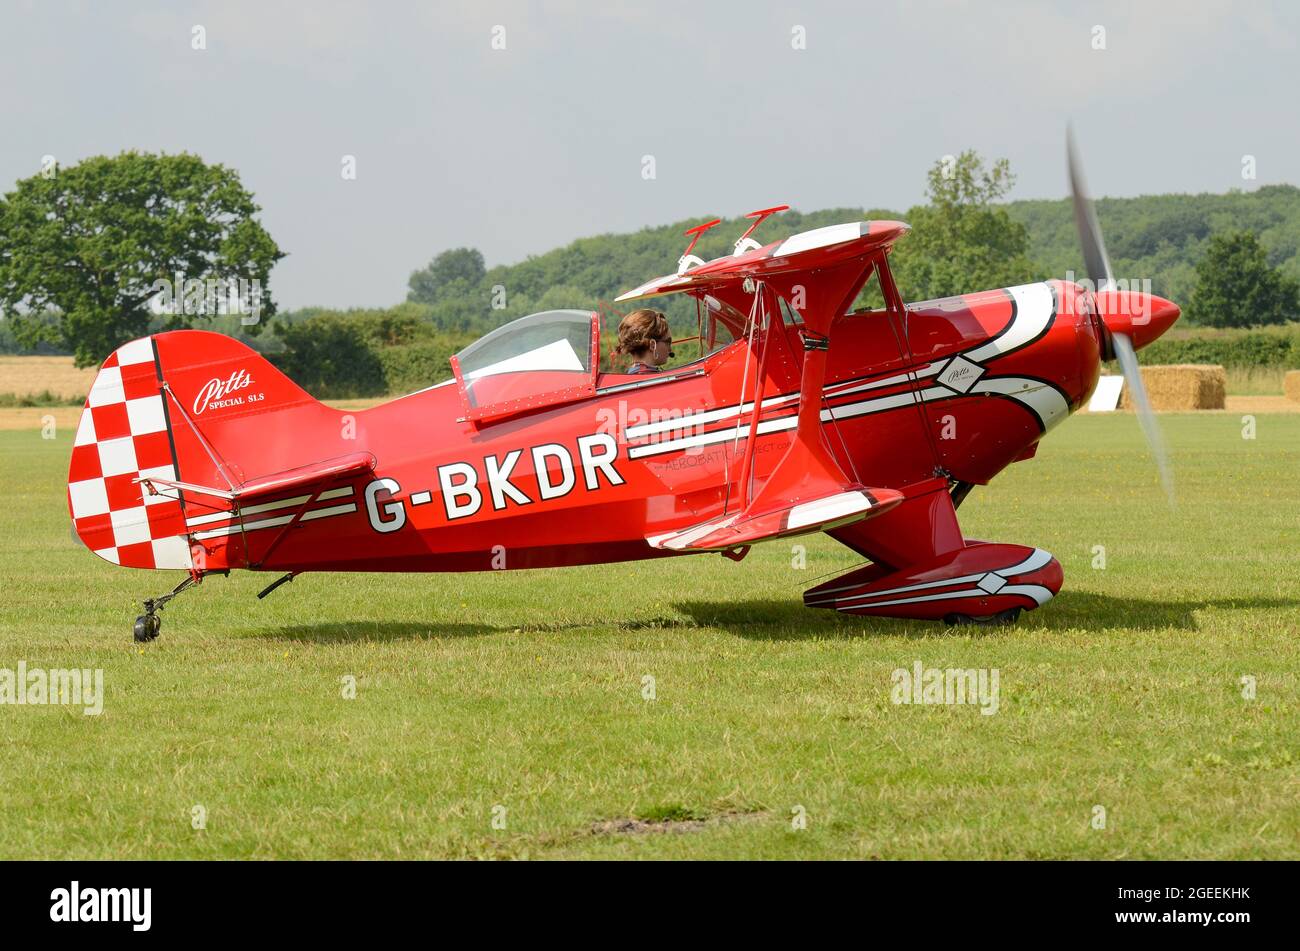 Female pilot Lauren Richardson preparing to display her Pitts Special aerobatic plane at an airshow. Married name Lauren Wilson. Grass airfield Stock Photo